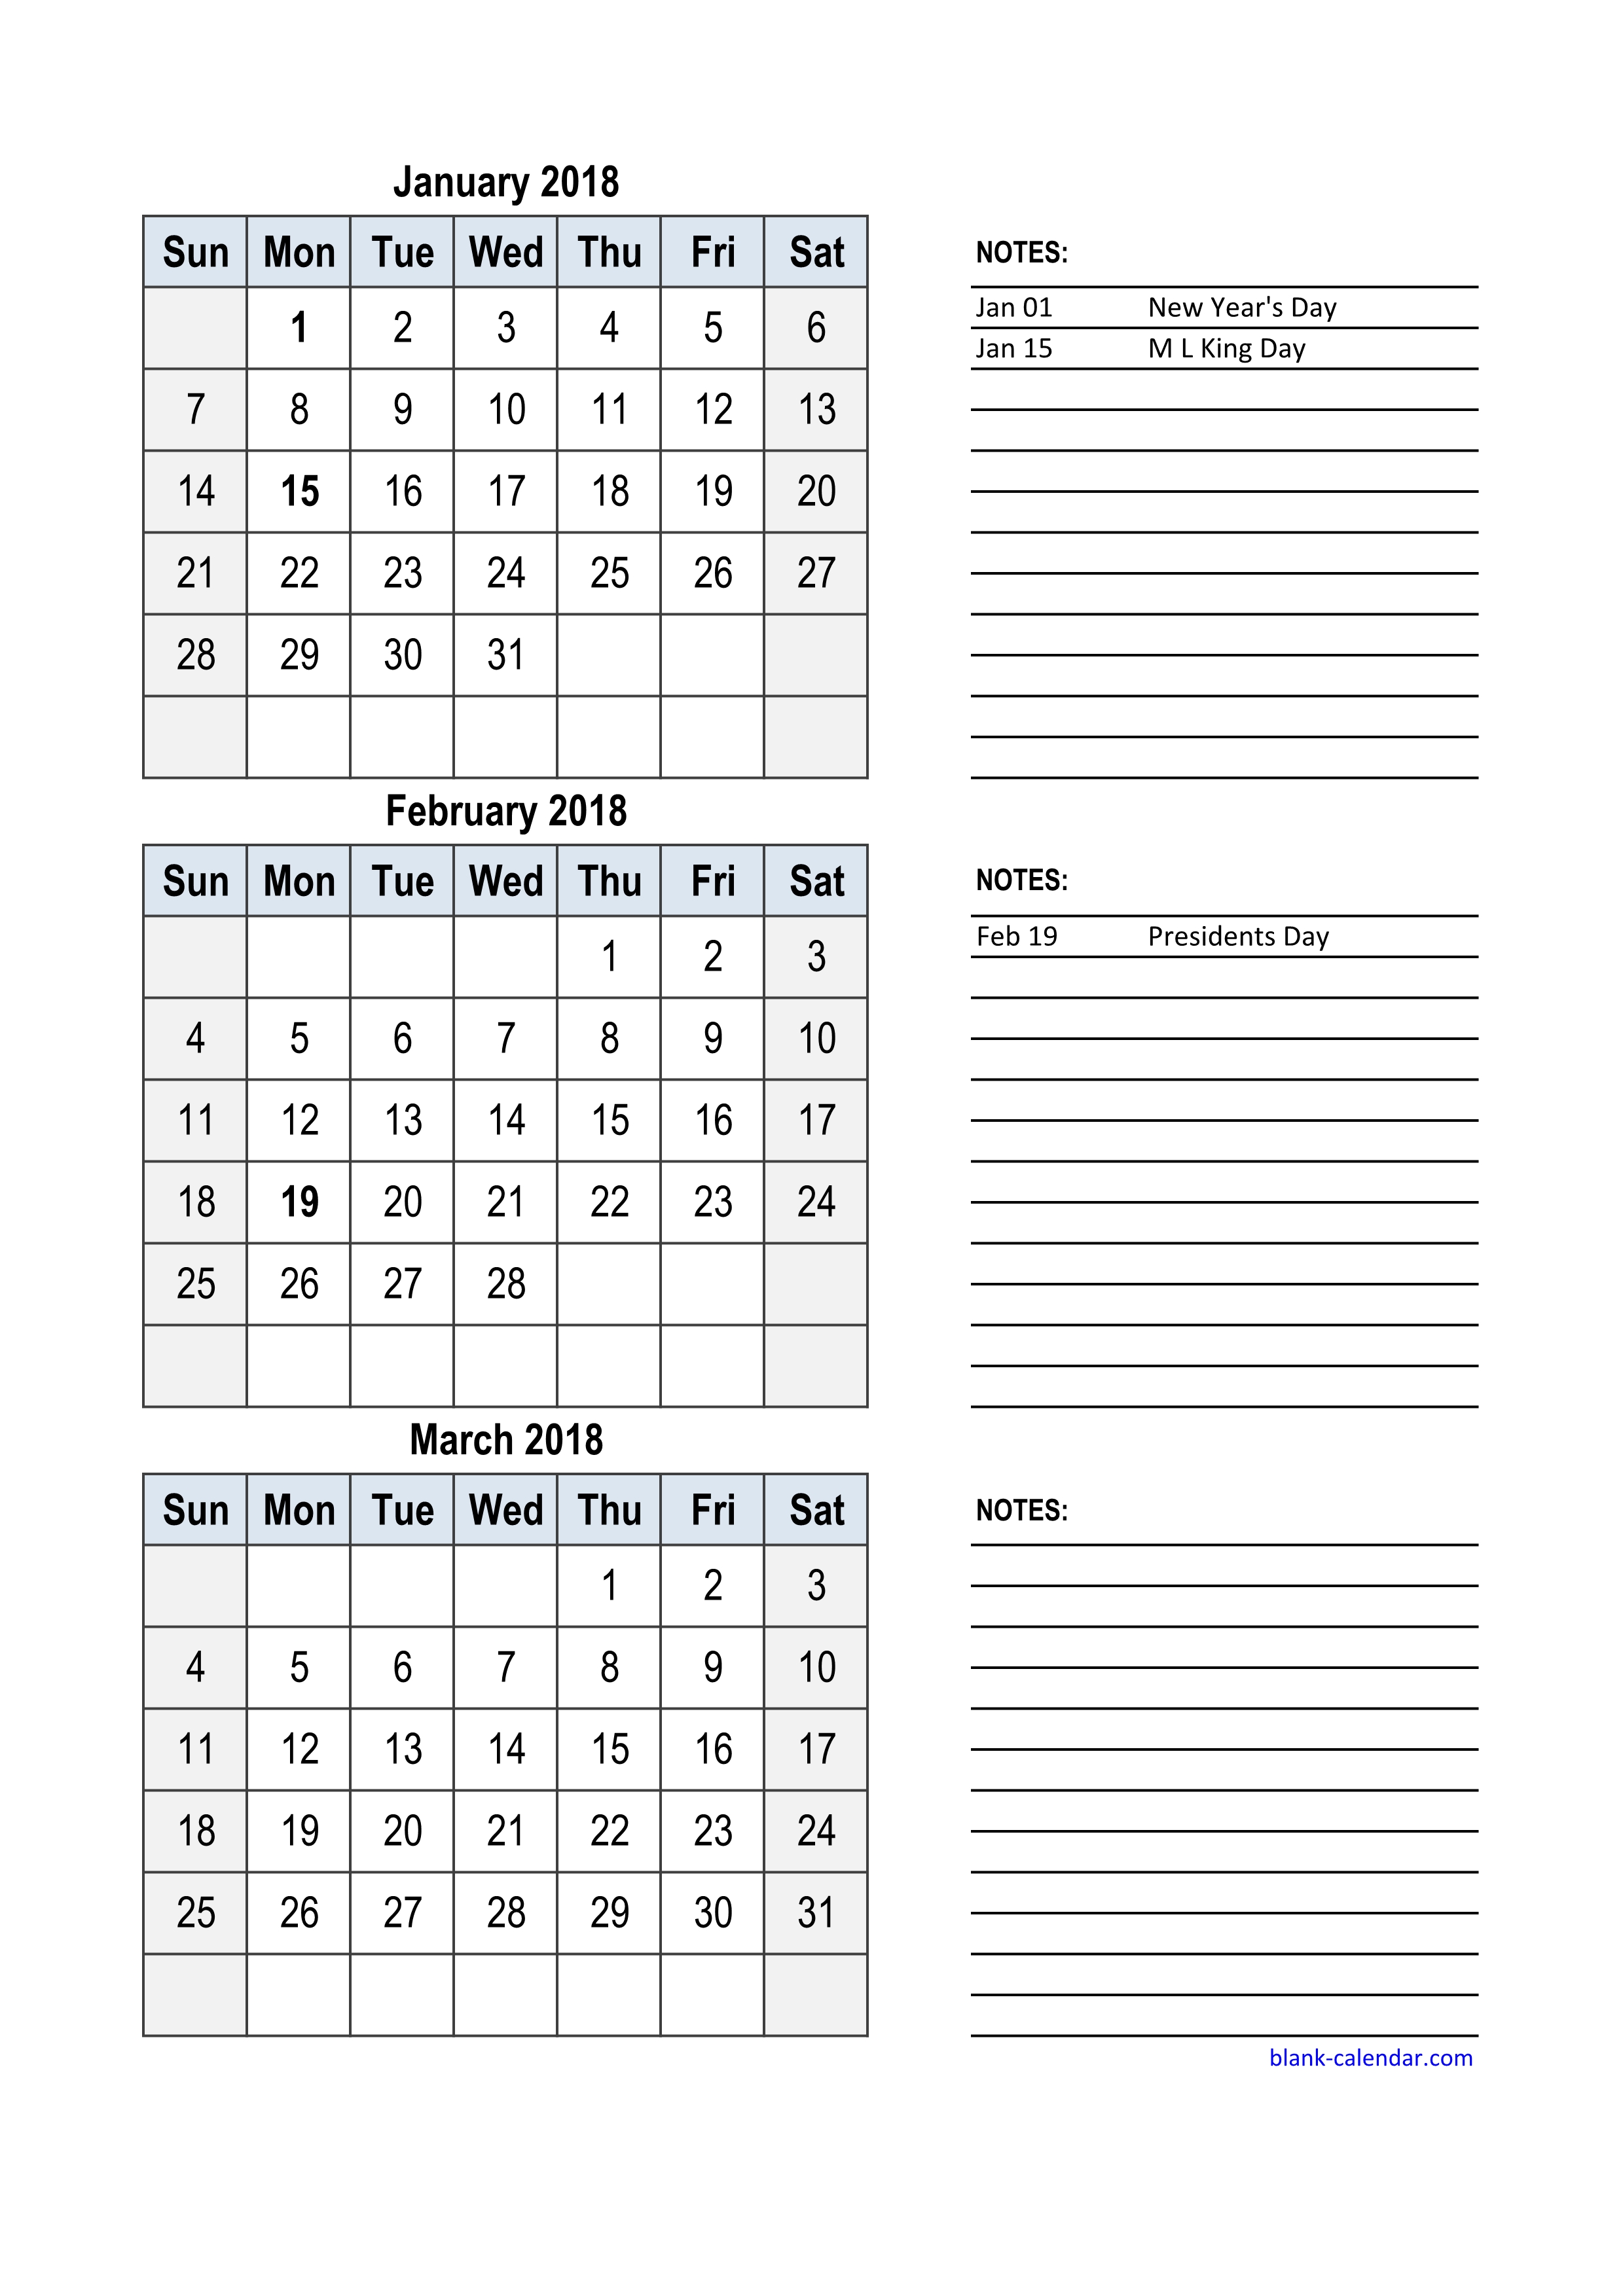 free-download-2018-excel-calendar-3-months-in-one-excel-spreadsheet